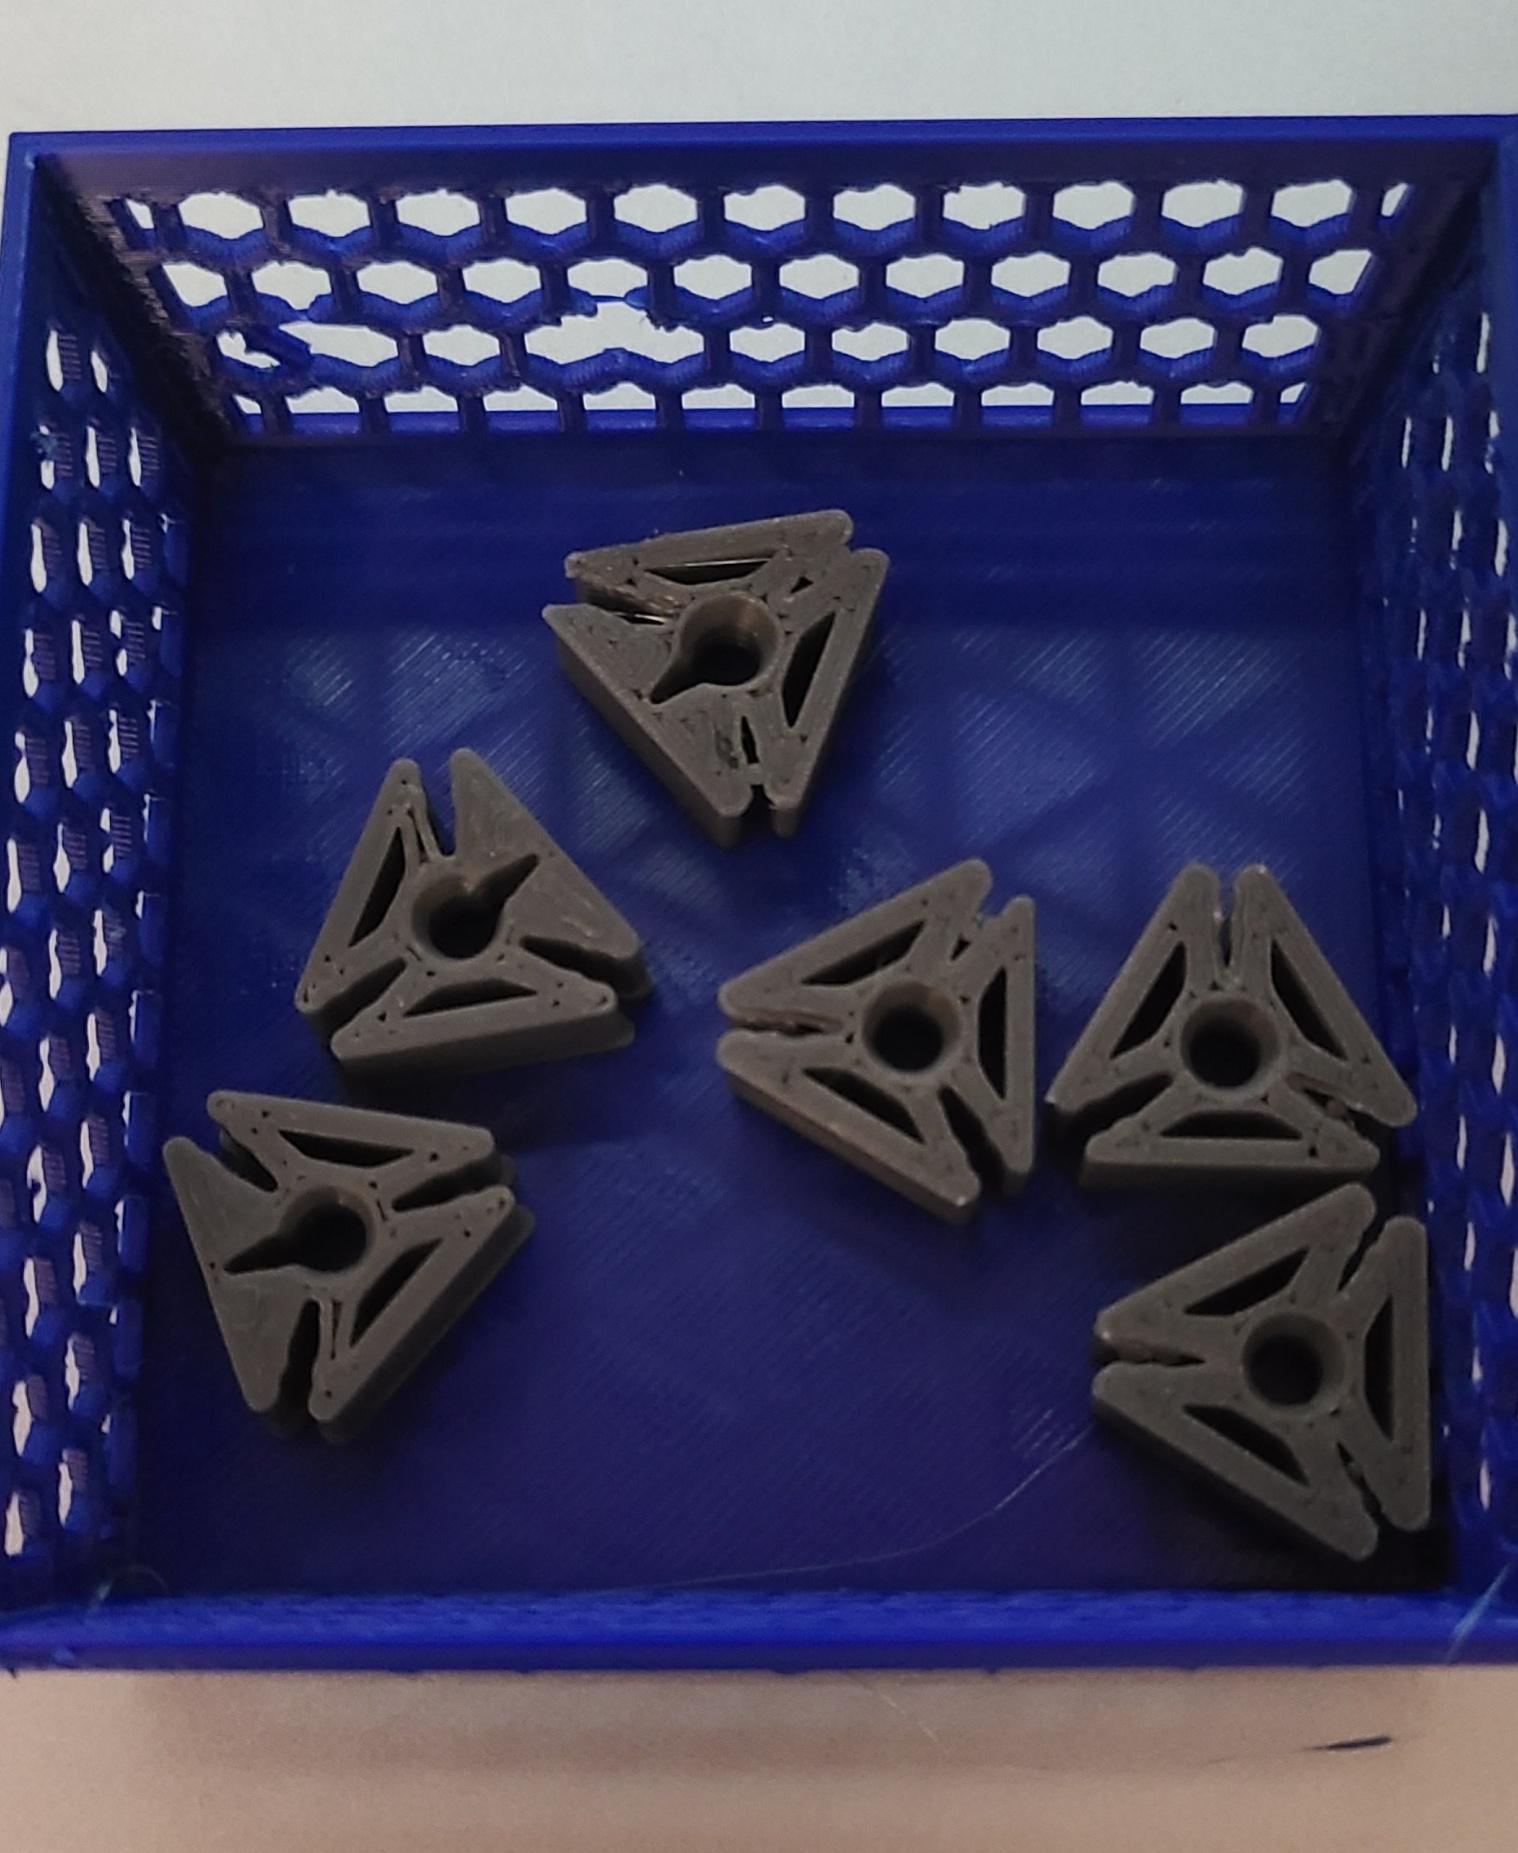 Hex Tray / Bin / Basket - Printed with Overture Blue PETG on a Sovol SV06.
Not sure what happened on one side, there are two hex areas that didn't print correctly. 
The other three side printed as expected. - 3d model